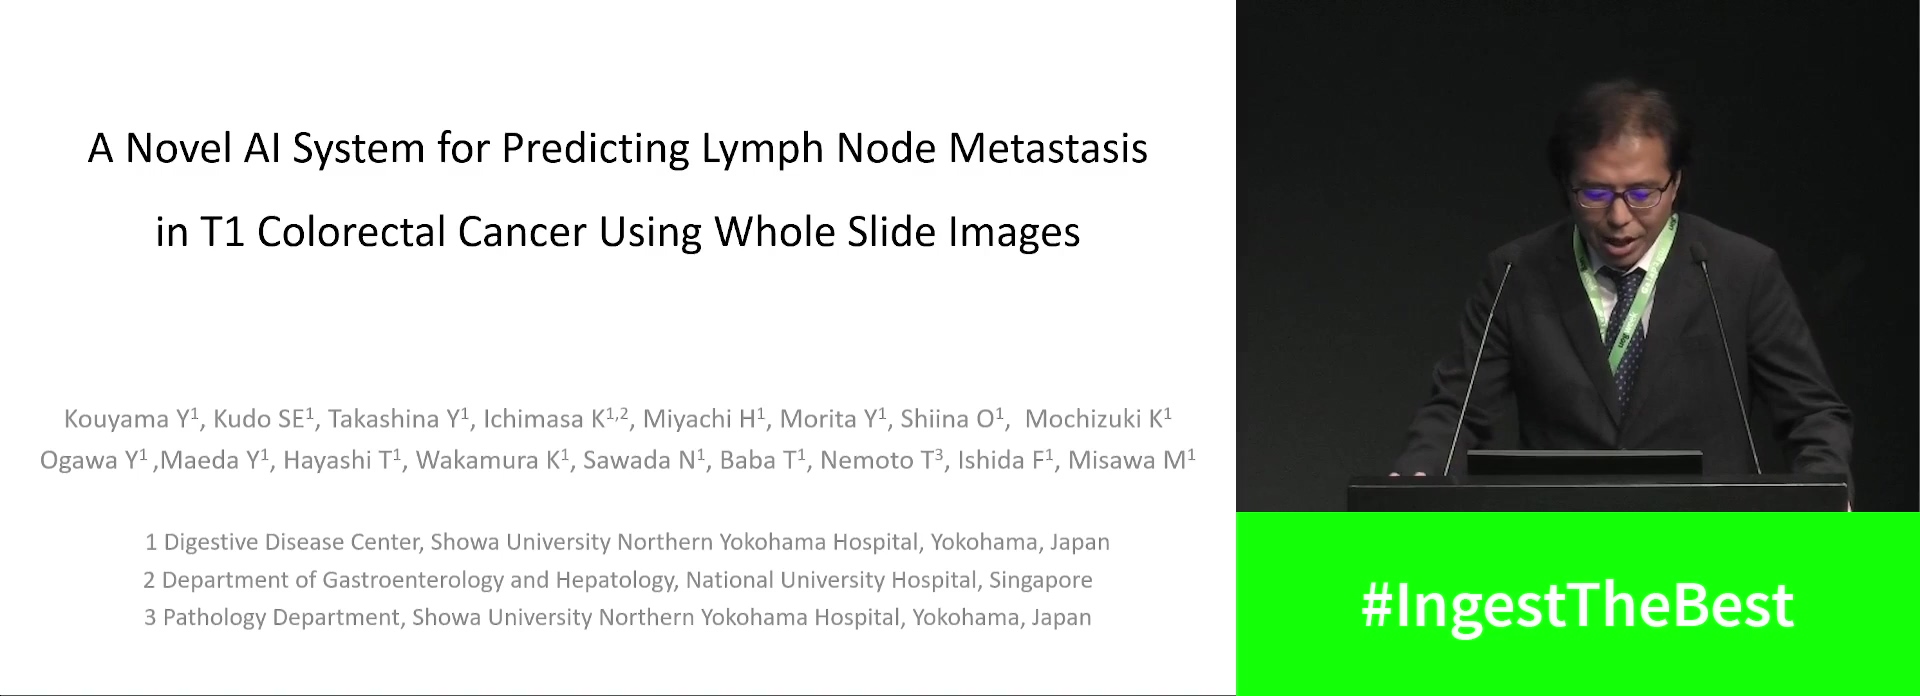 A NOVEL AI SYSTEM FOR PREDICTING LYMPH NODE METASTASIS IN T1 COLORECTAL CANCER USING WHOLE SLIDE IMAGES